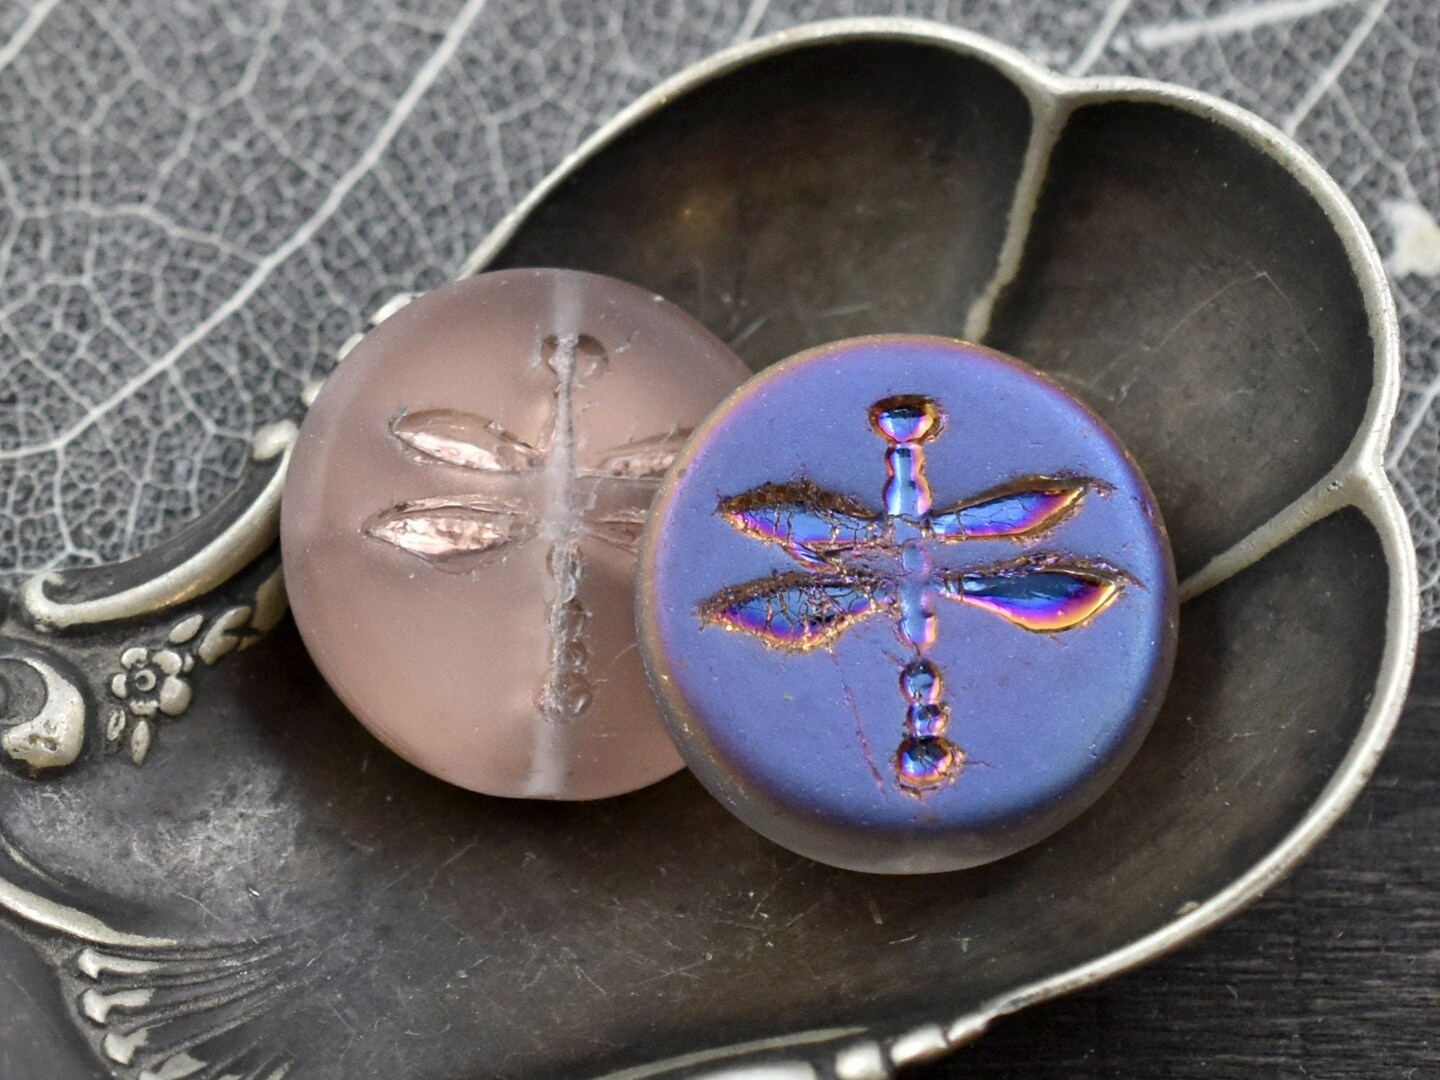 *2* 18mm Rosaline Pink Marea Dragonfly Coin Beads